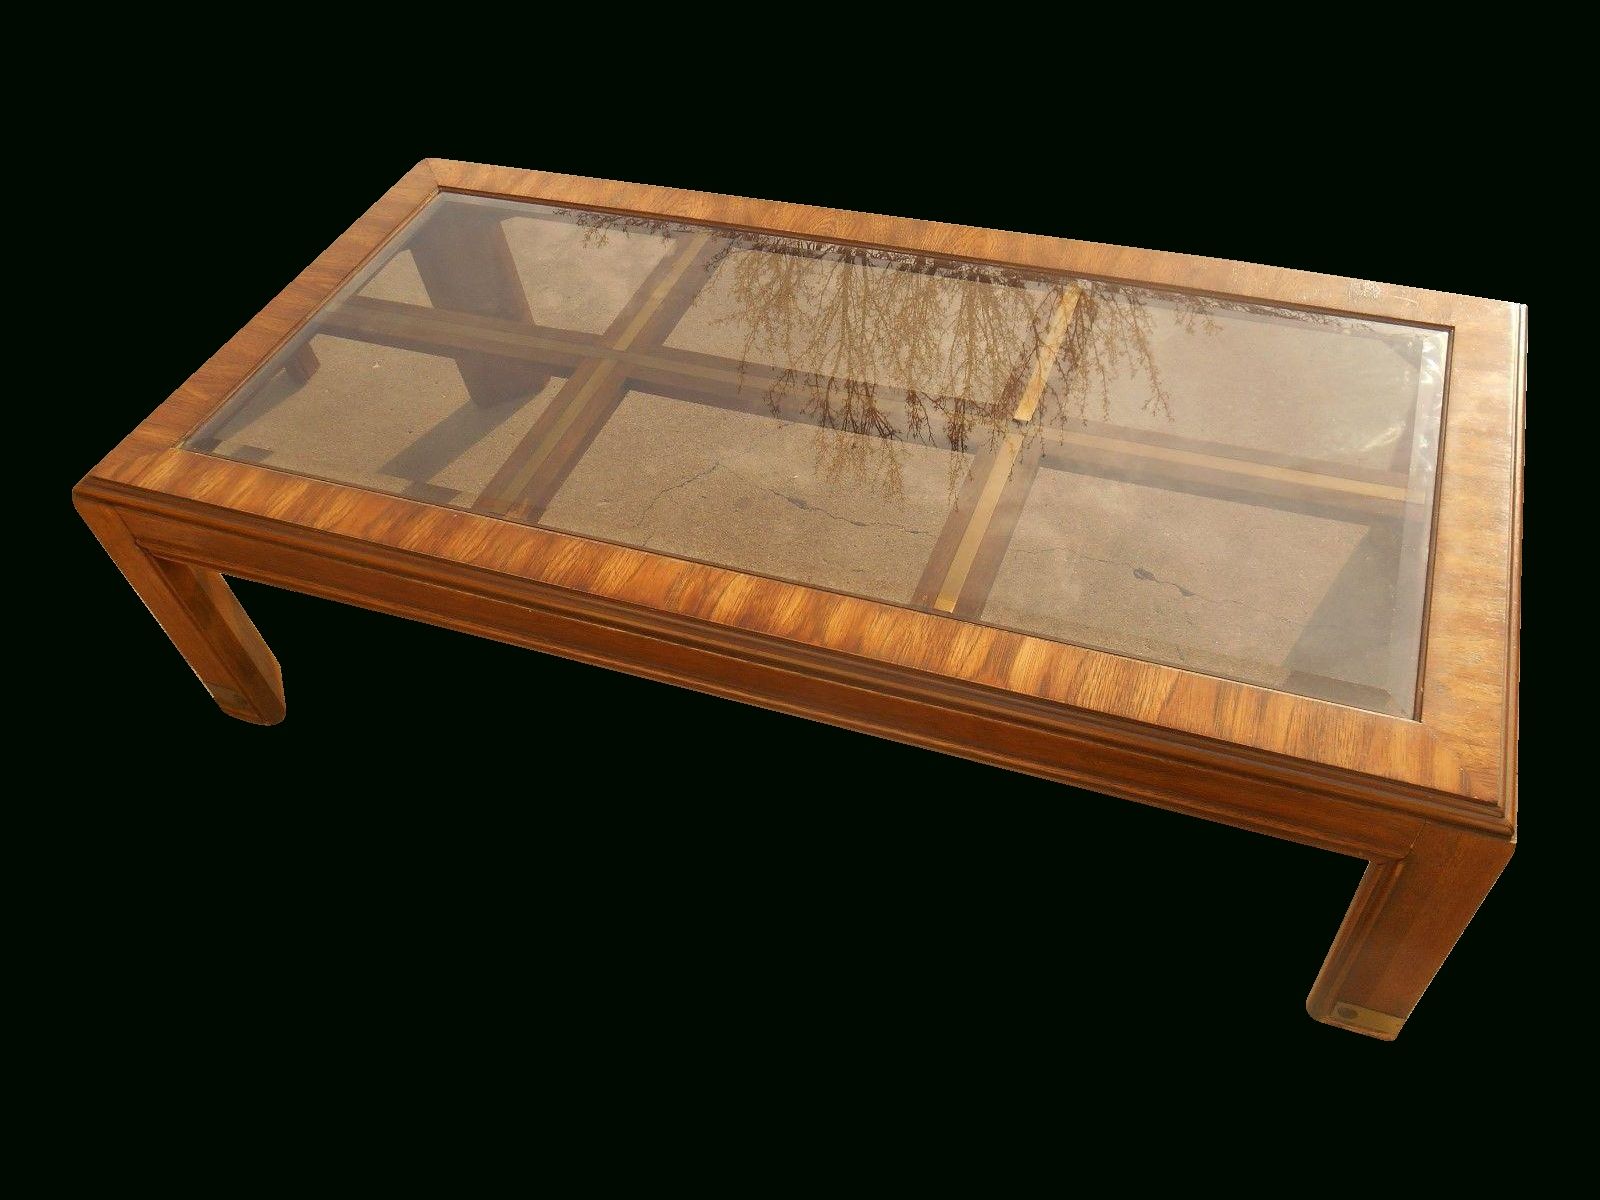 Brass And Wood Coffee Table Brass And Wood Coffee Table With Popular Joni Brass And Wood Coffee Tables (View 6 of 20)